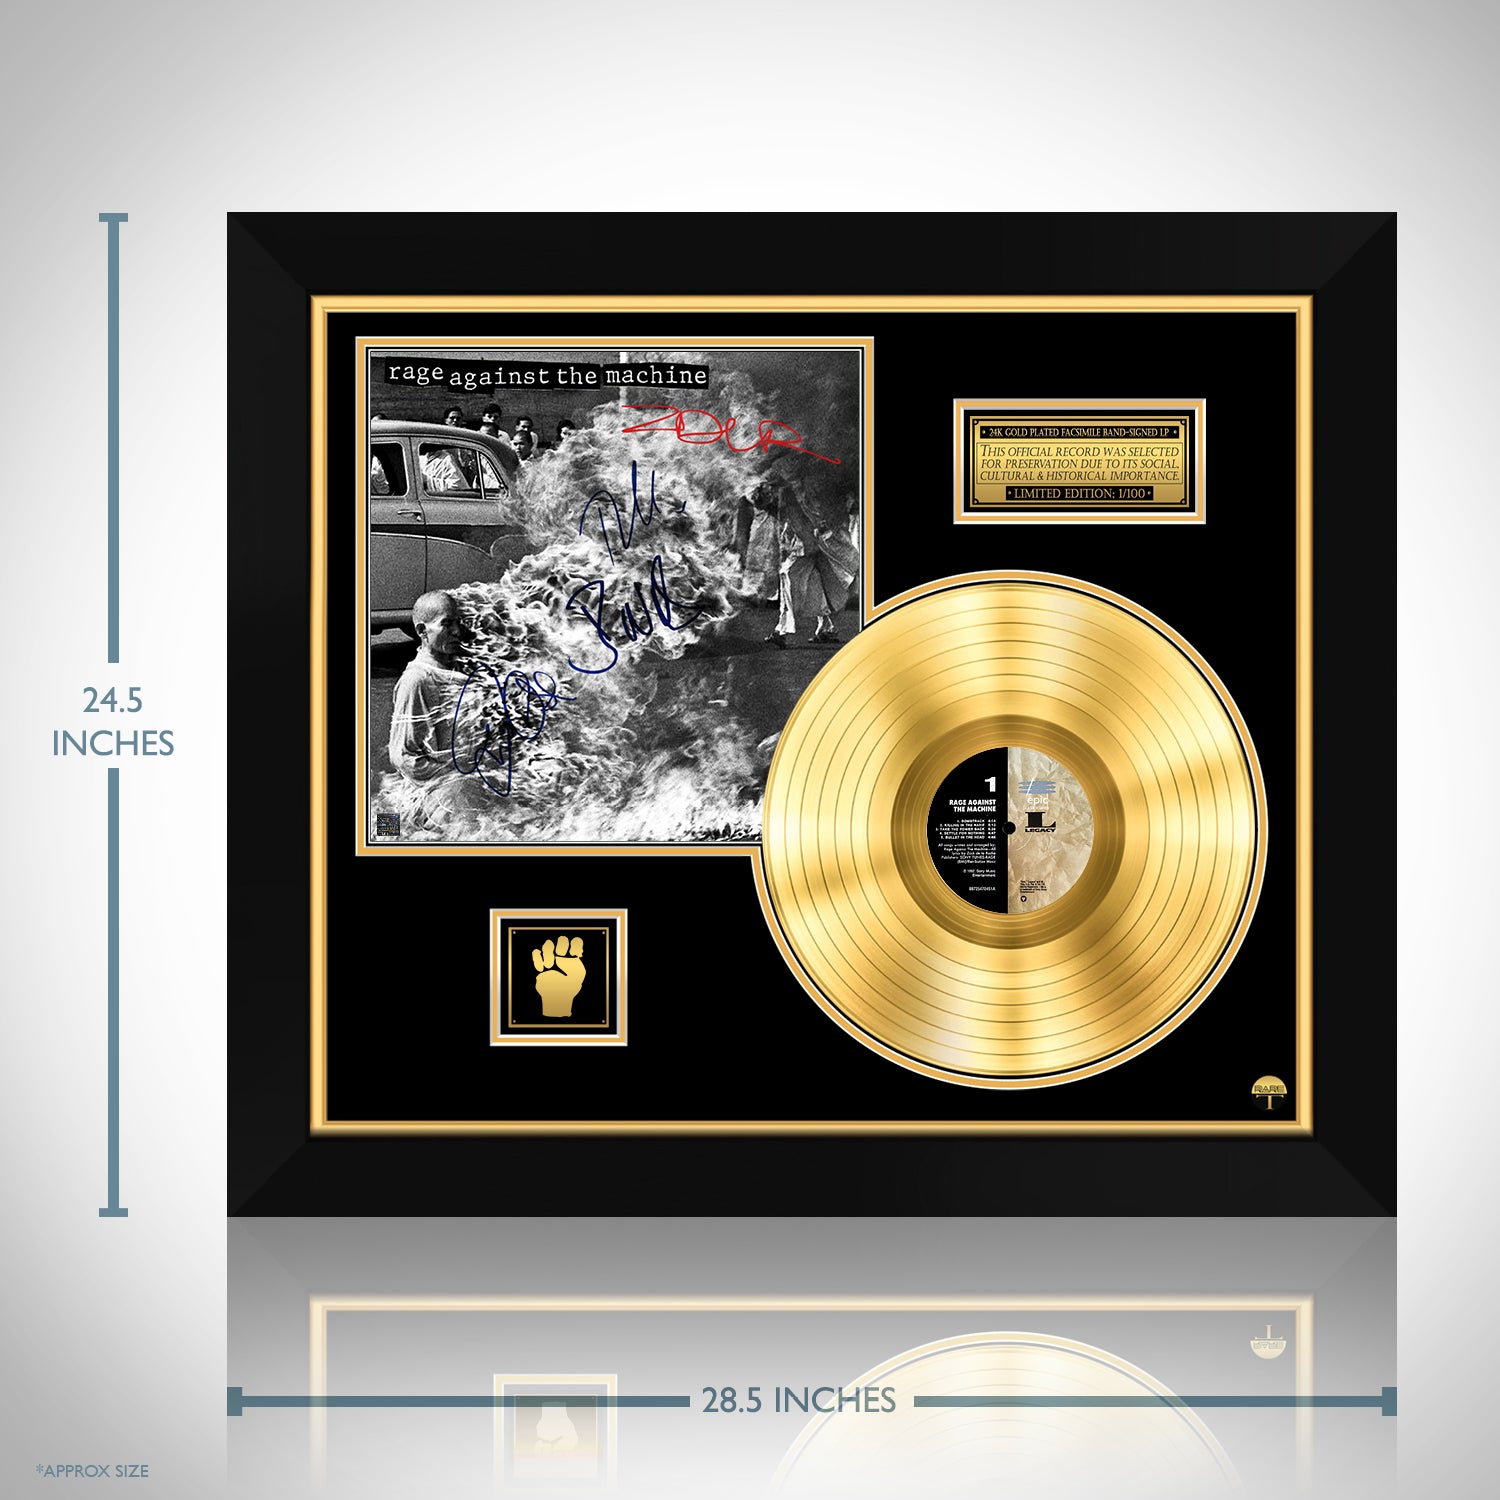 Rage Against The Machine Gold LP Limited Signature Edition Custom Frame